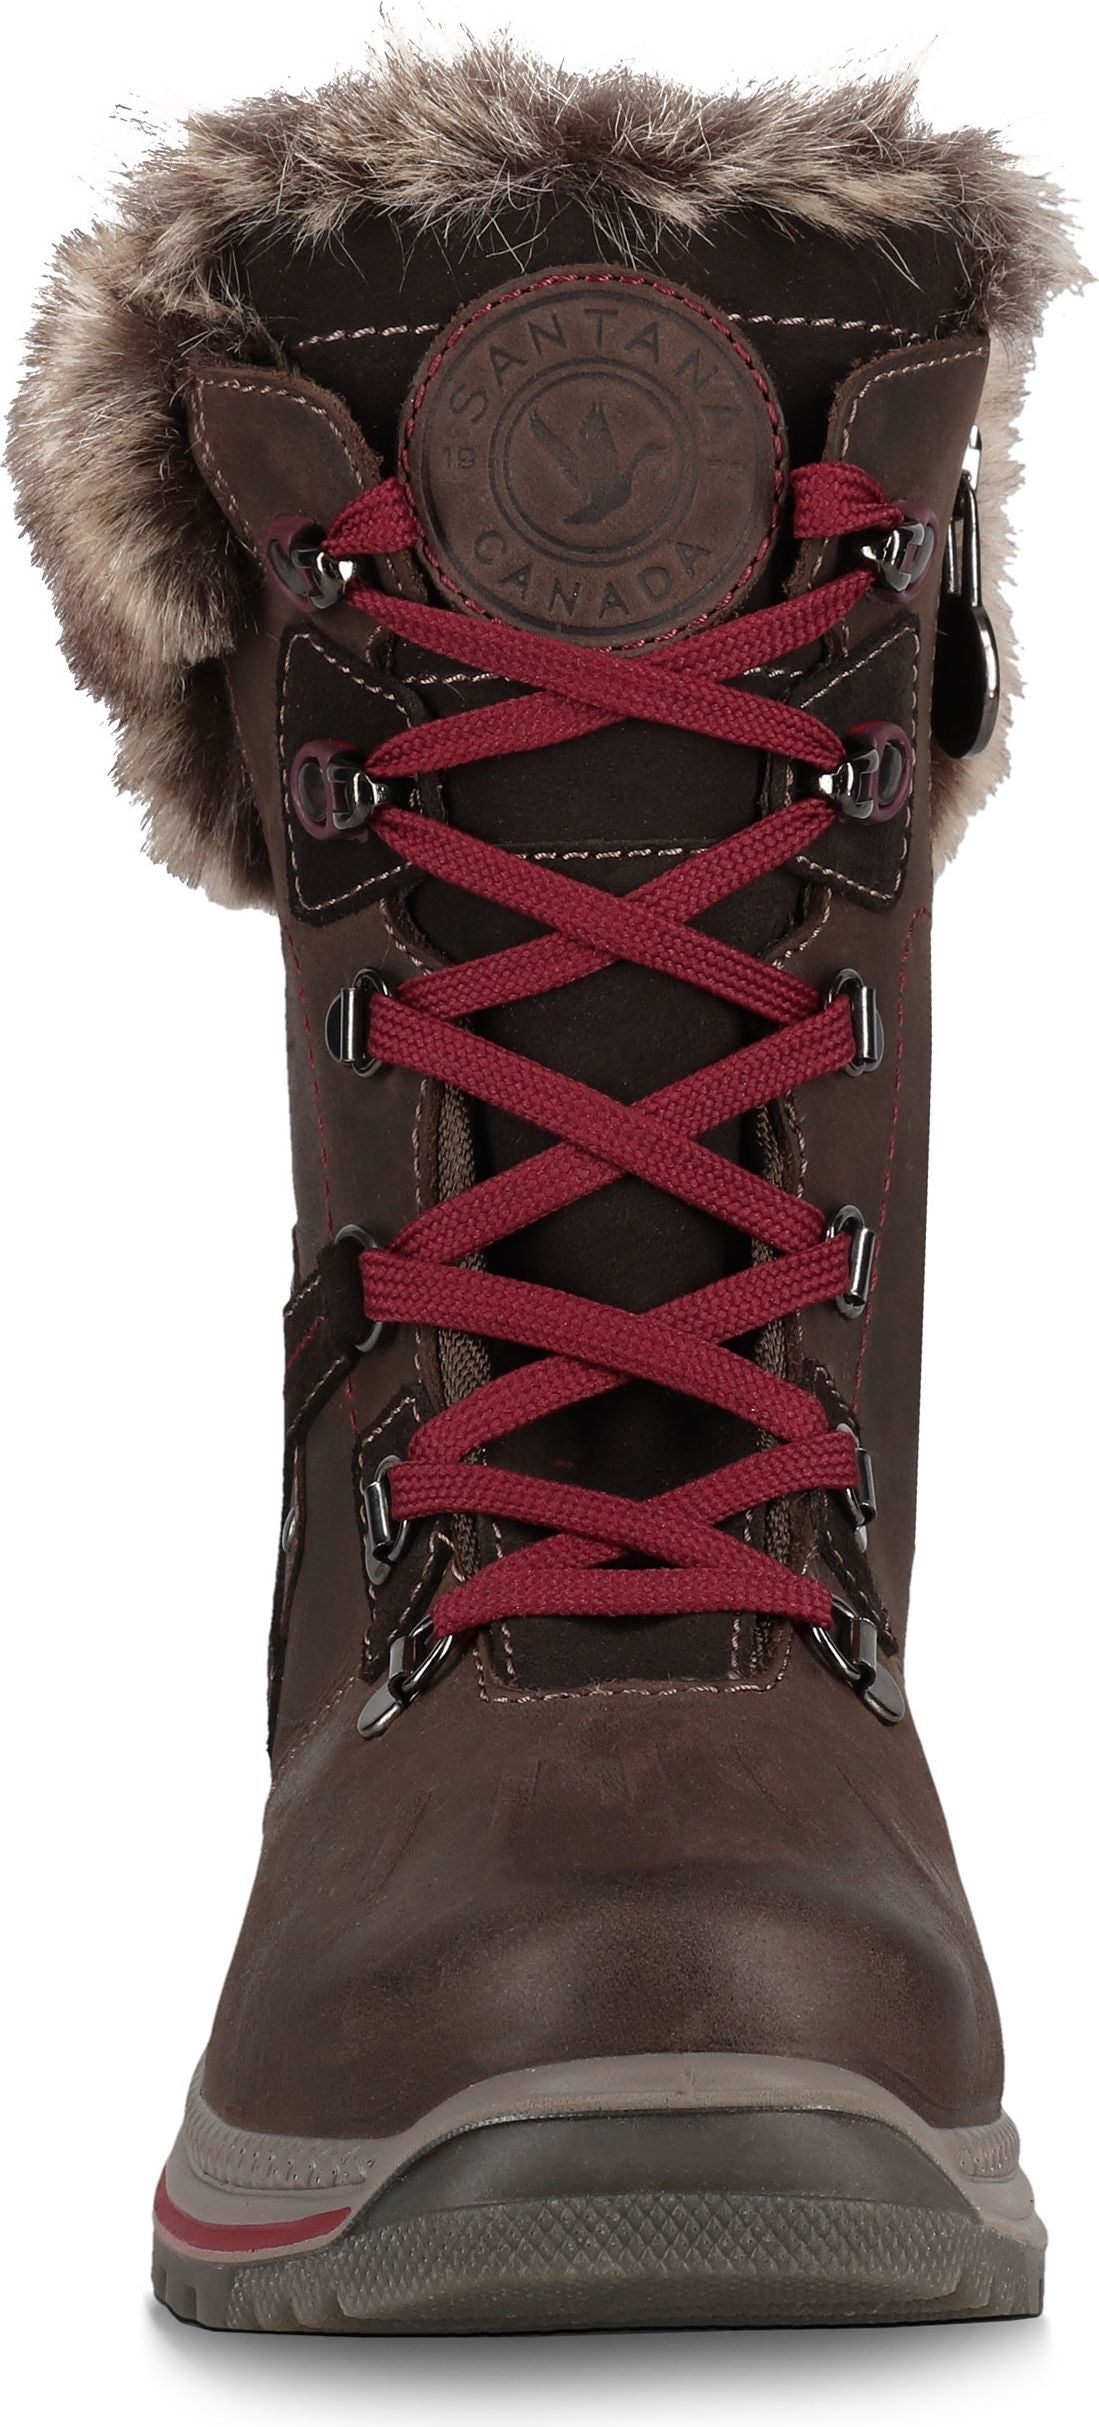 Santana Canada Boots Milly Leather Brown Burgundy